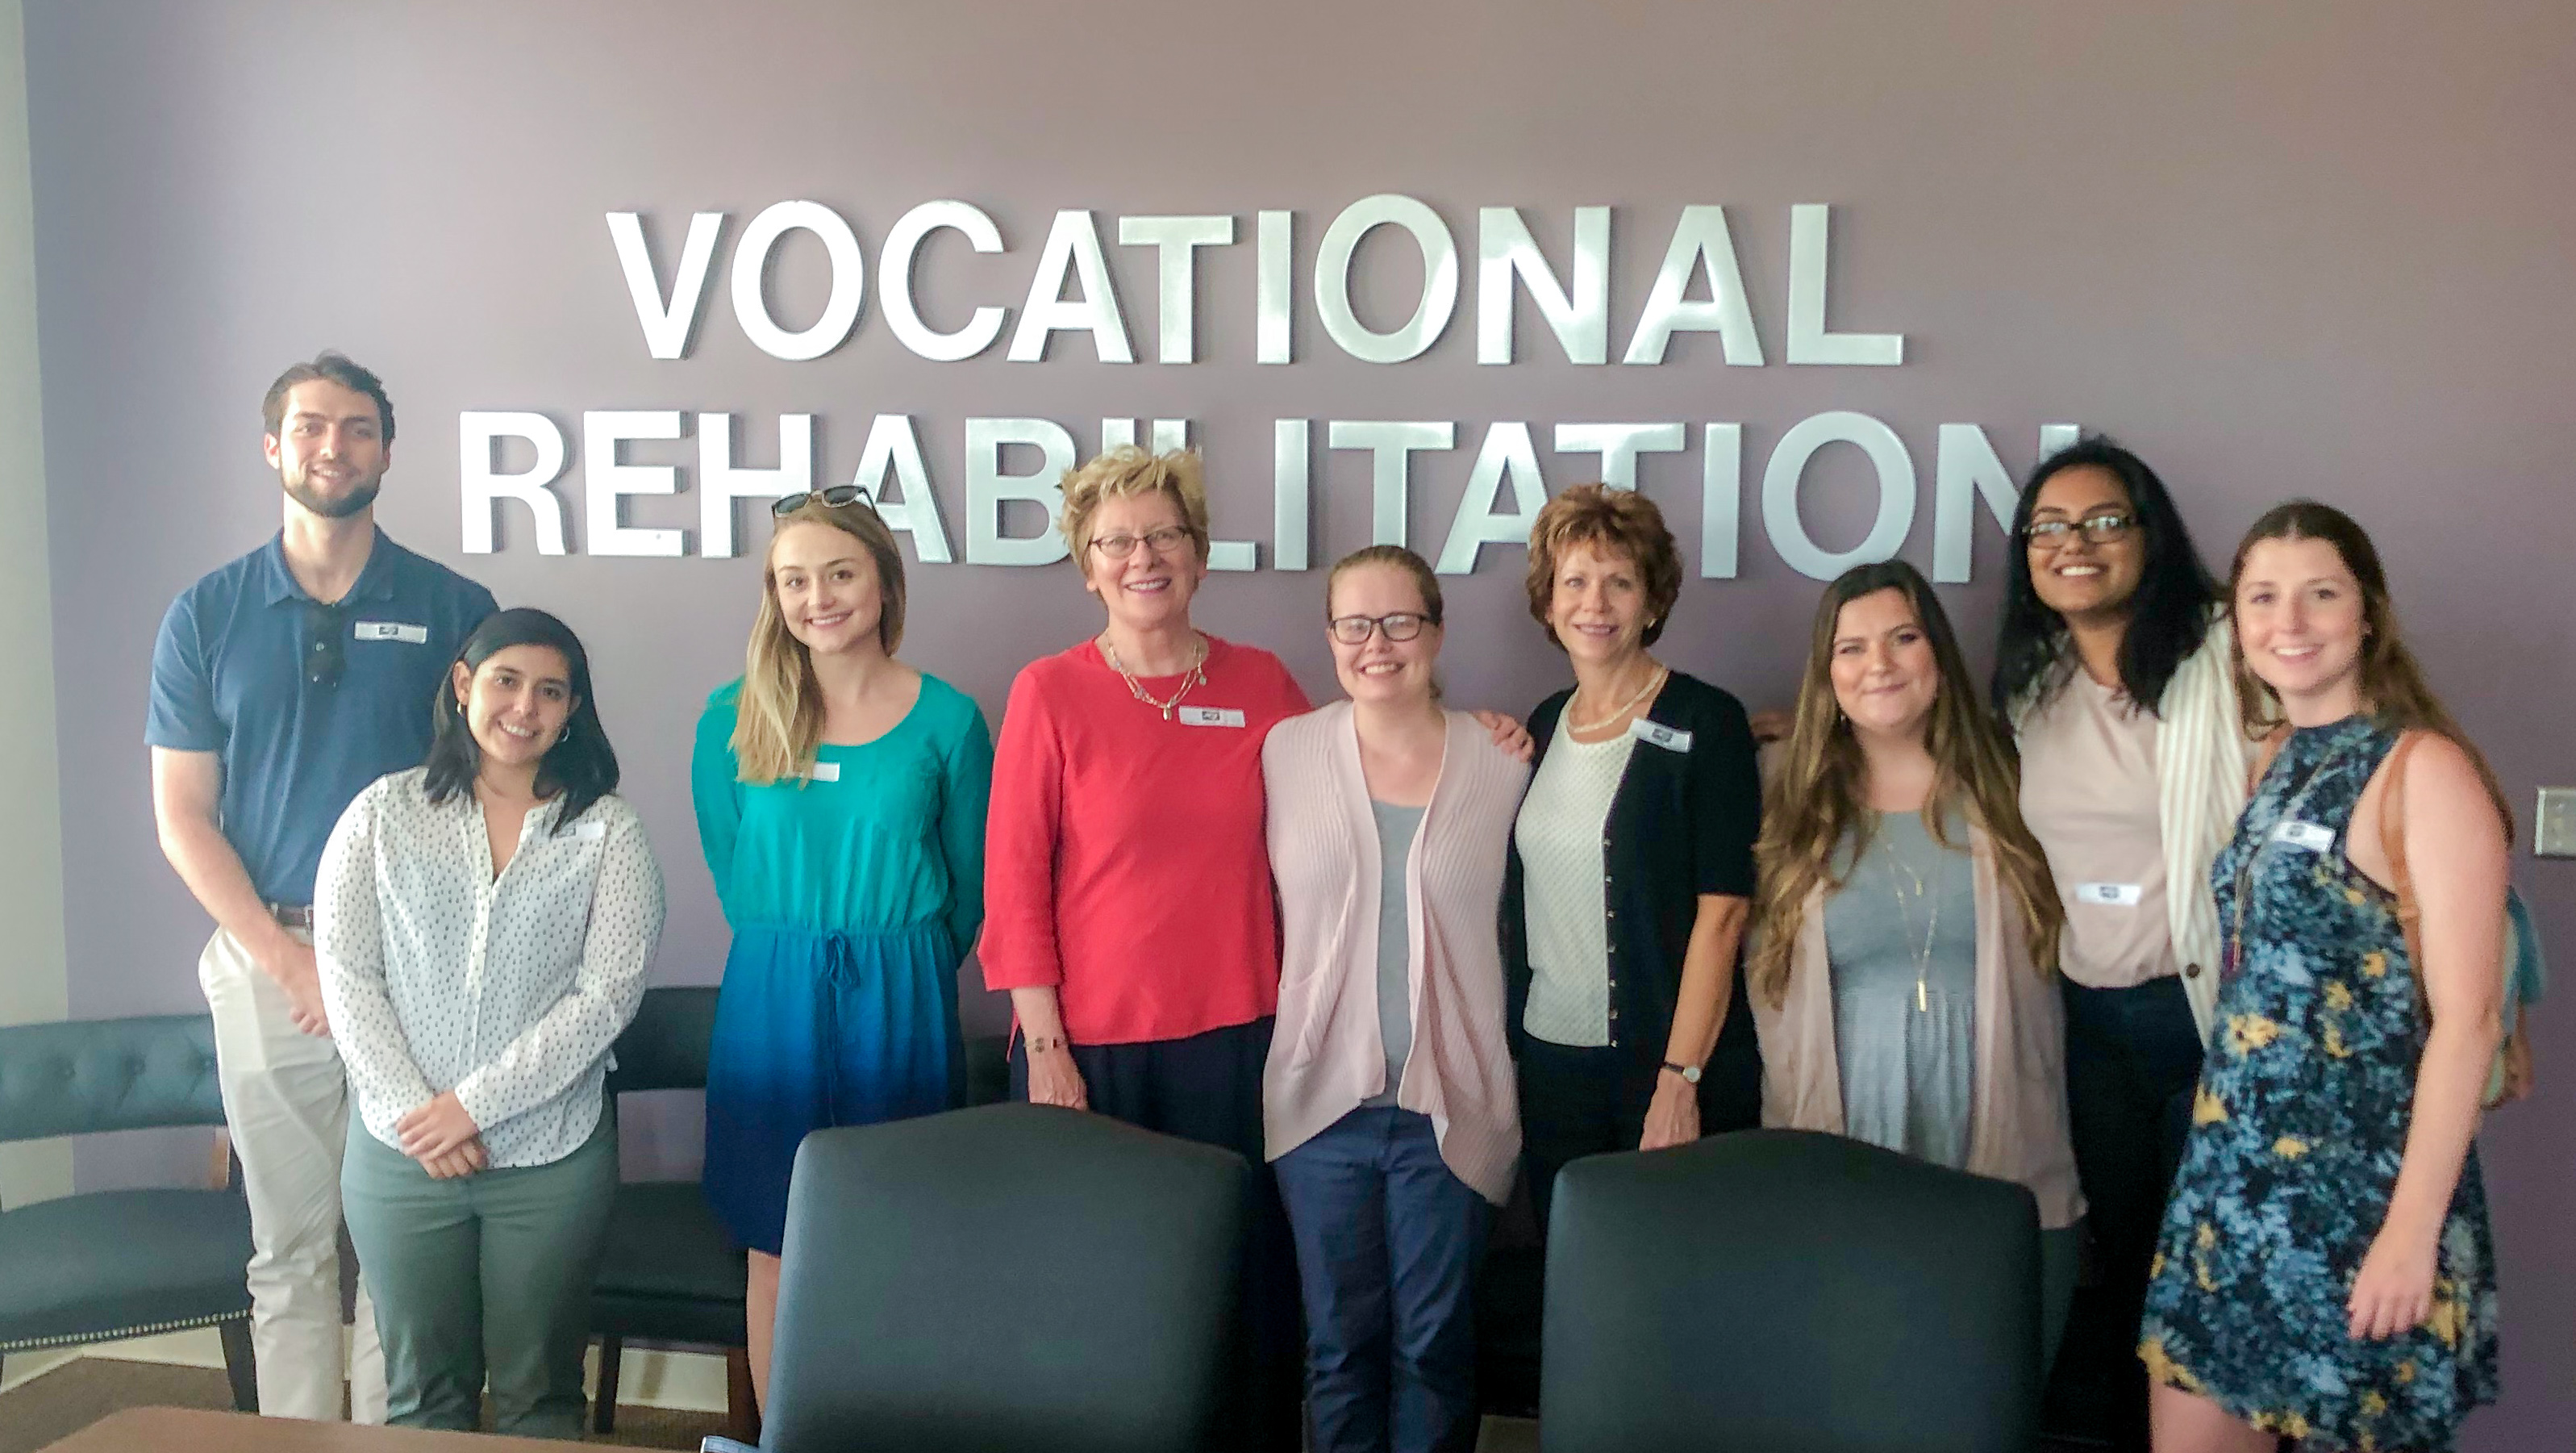 The RSA scholars took a trip to eastern North Carolina to tour vocational rehabilitation and community rehabilitation offices.